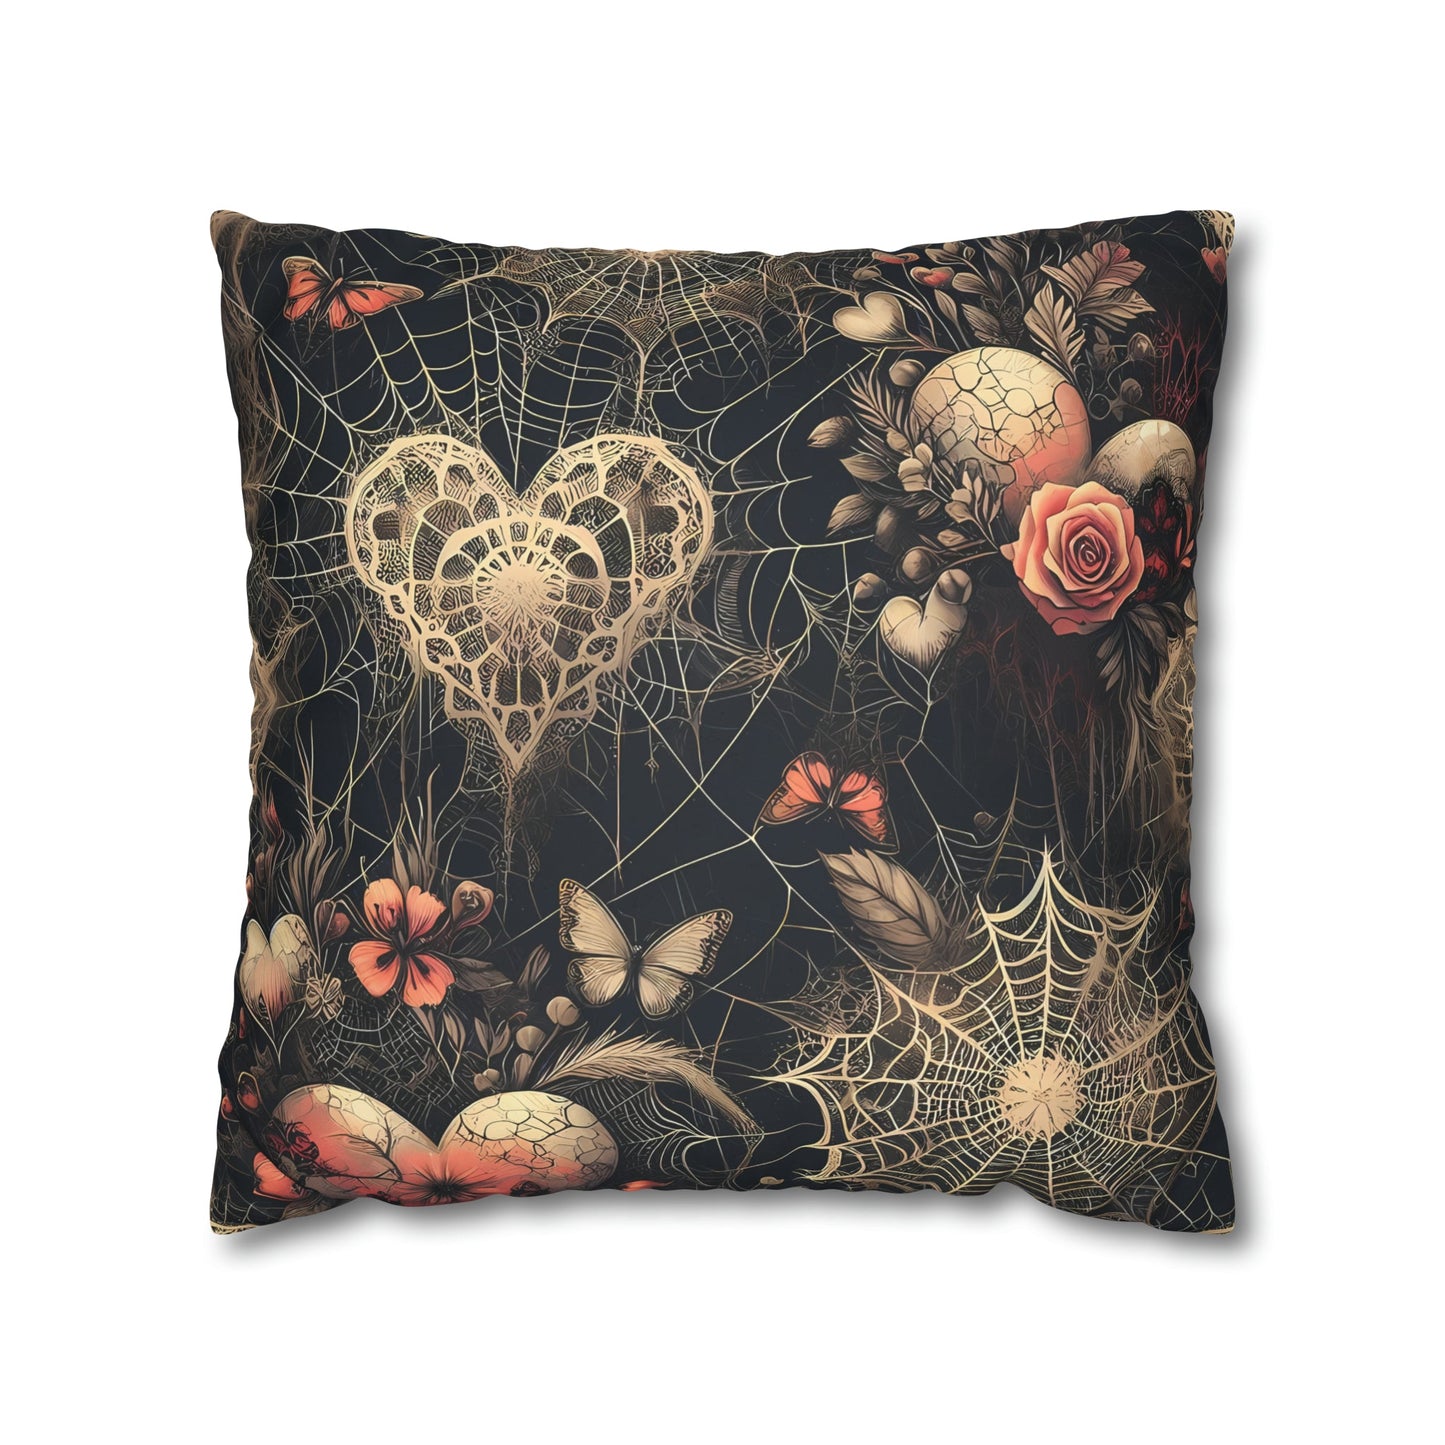 Spiderweb Hearts and Roses Faux Suede Square Pillow CaseHome DecorVTZdesigns18" × 18"All Over PrintAOPBed